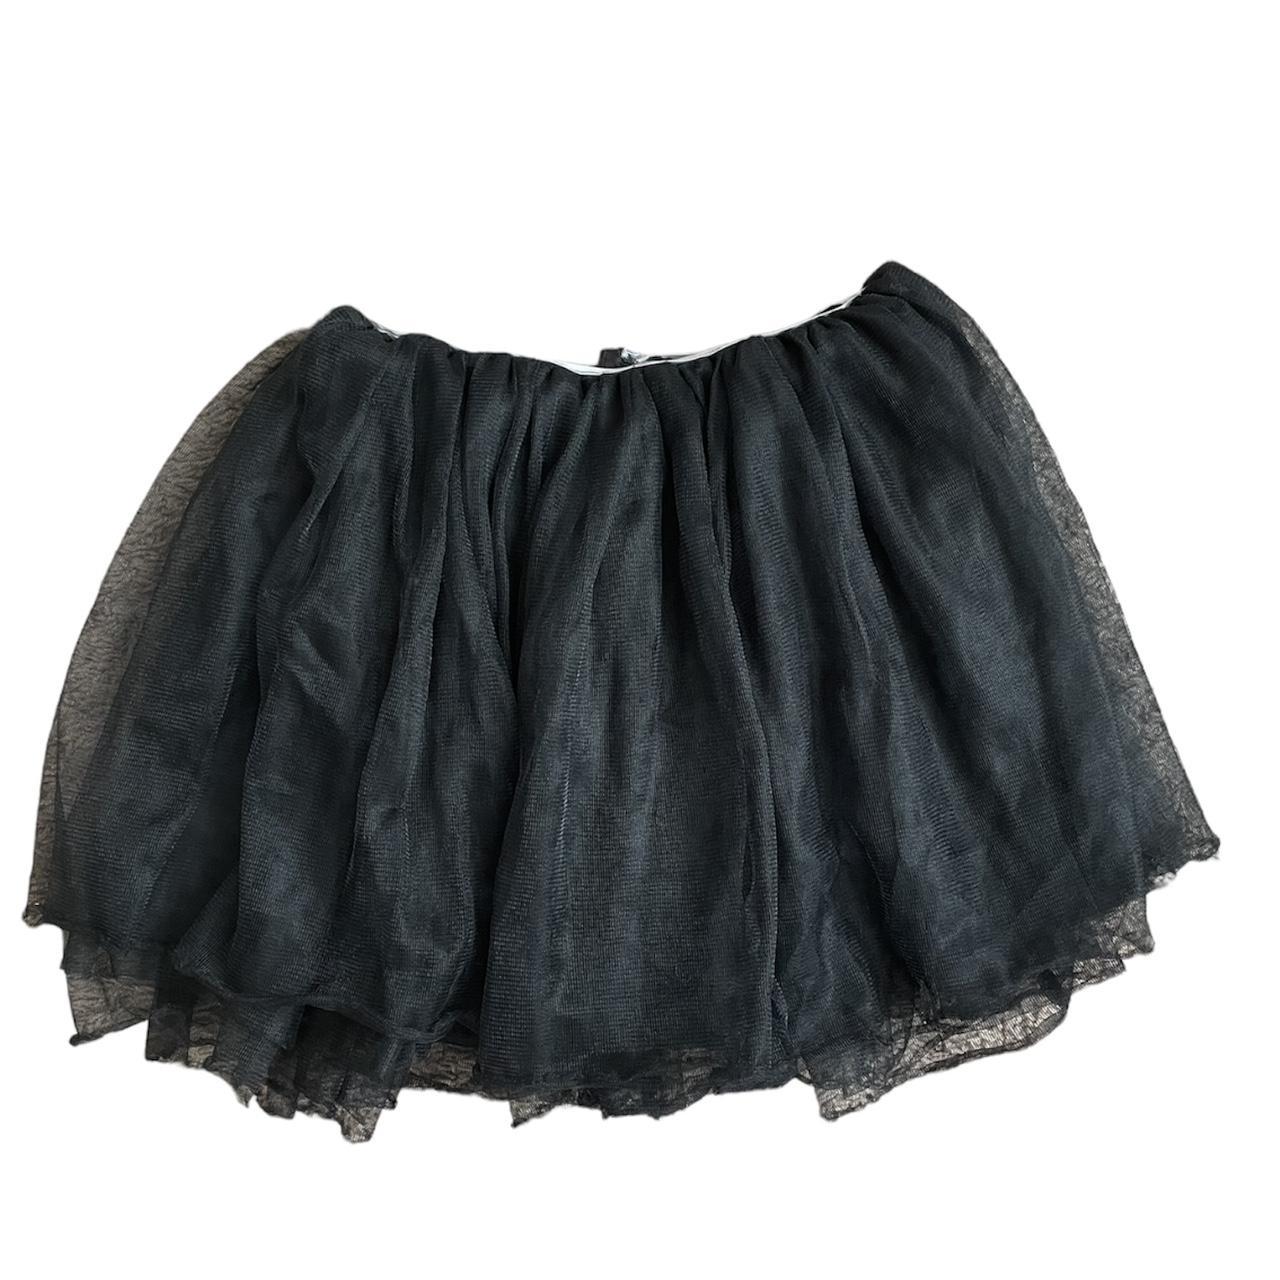 Black tulle tutu - stop book wishes - very soft... - Depop